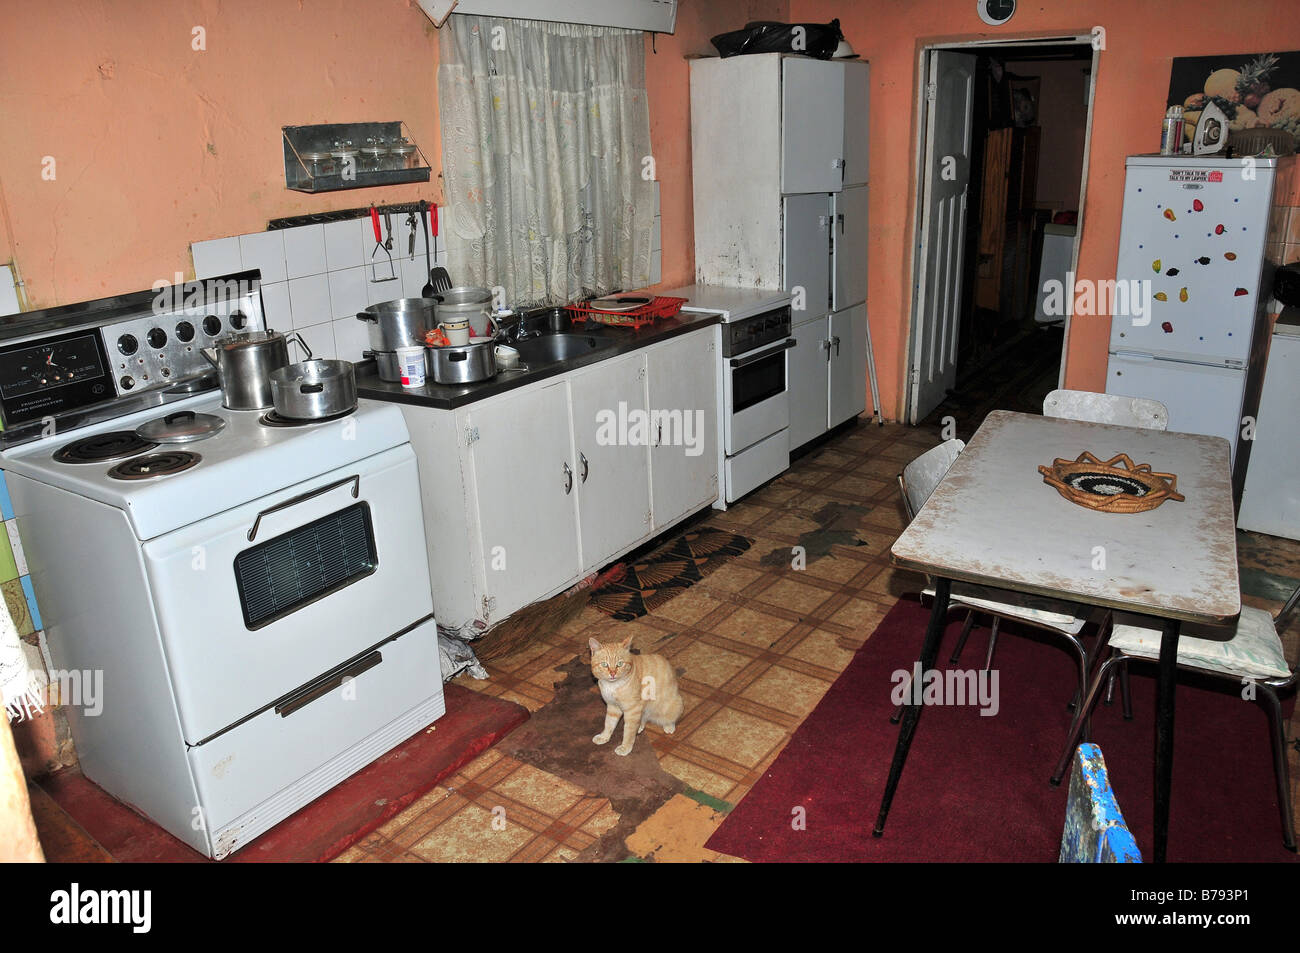 Township house kitchen interior, Grahamstown, South Africa Stock Photo